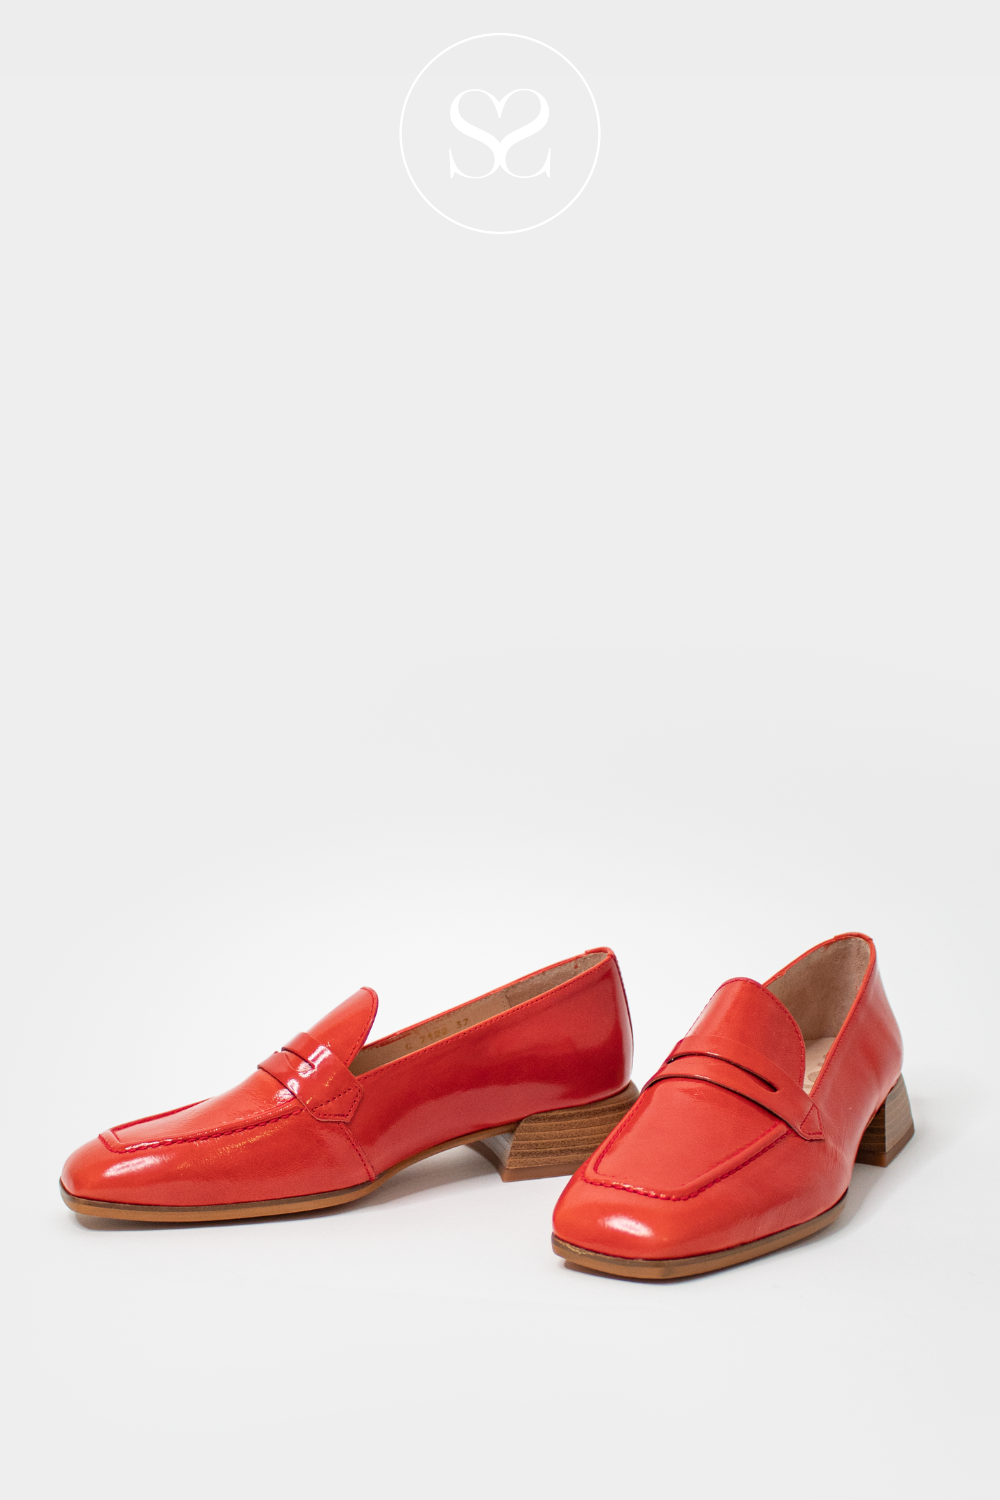 WONDERS C-7122 RED PATENT LEATHER LOW HEEL SLIP ON LOAFERS